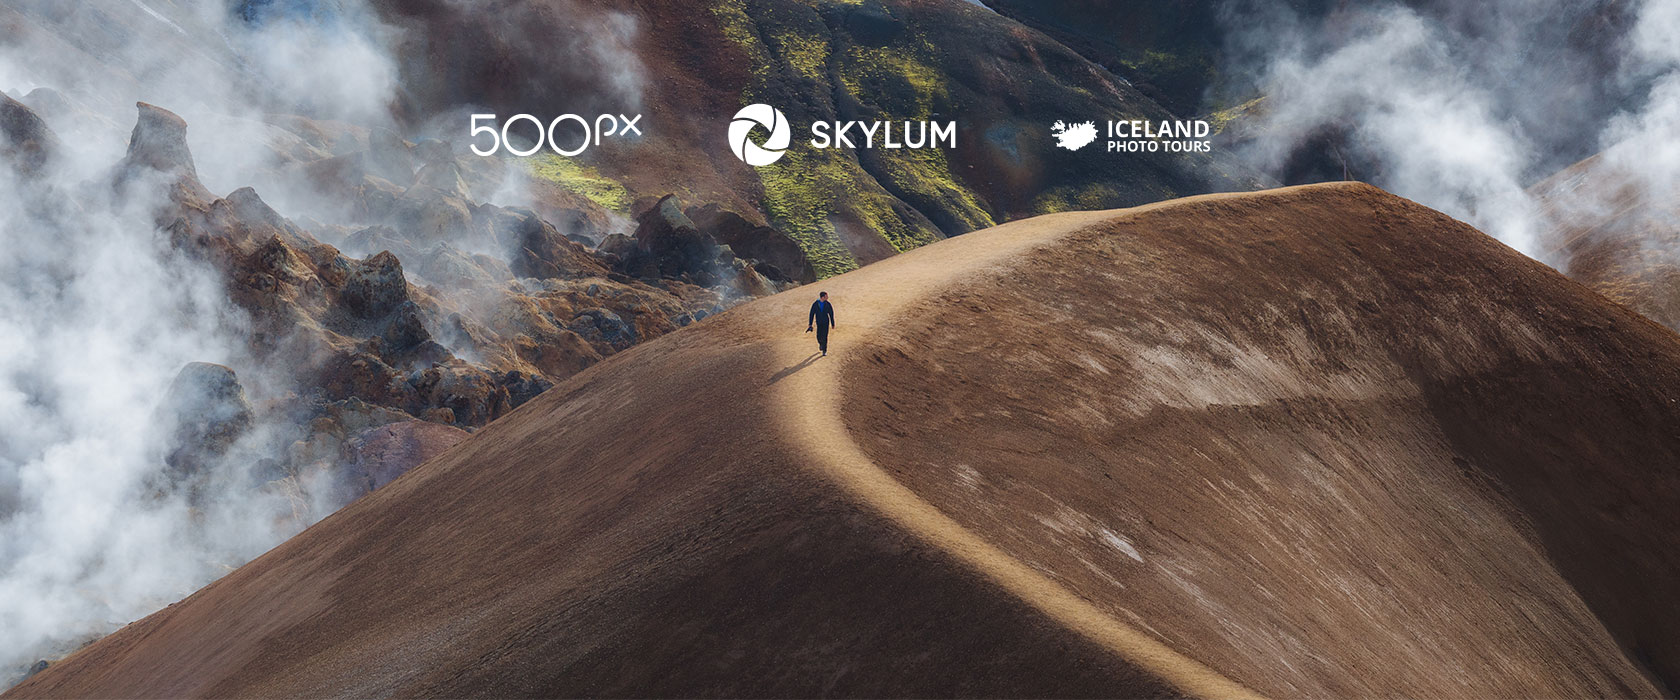 Win an epic photography trip with Skylum, Iceland Photo Tours + 500px Quests